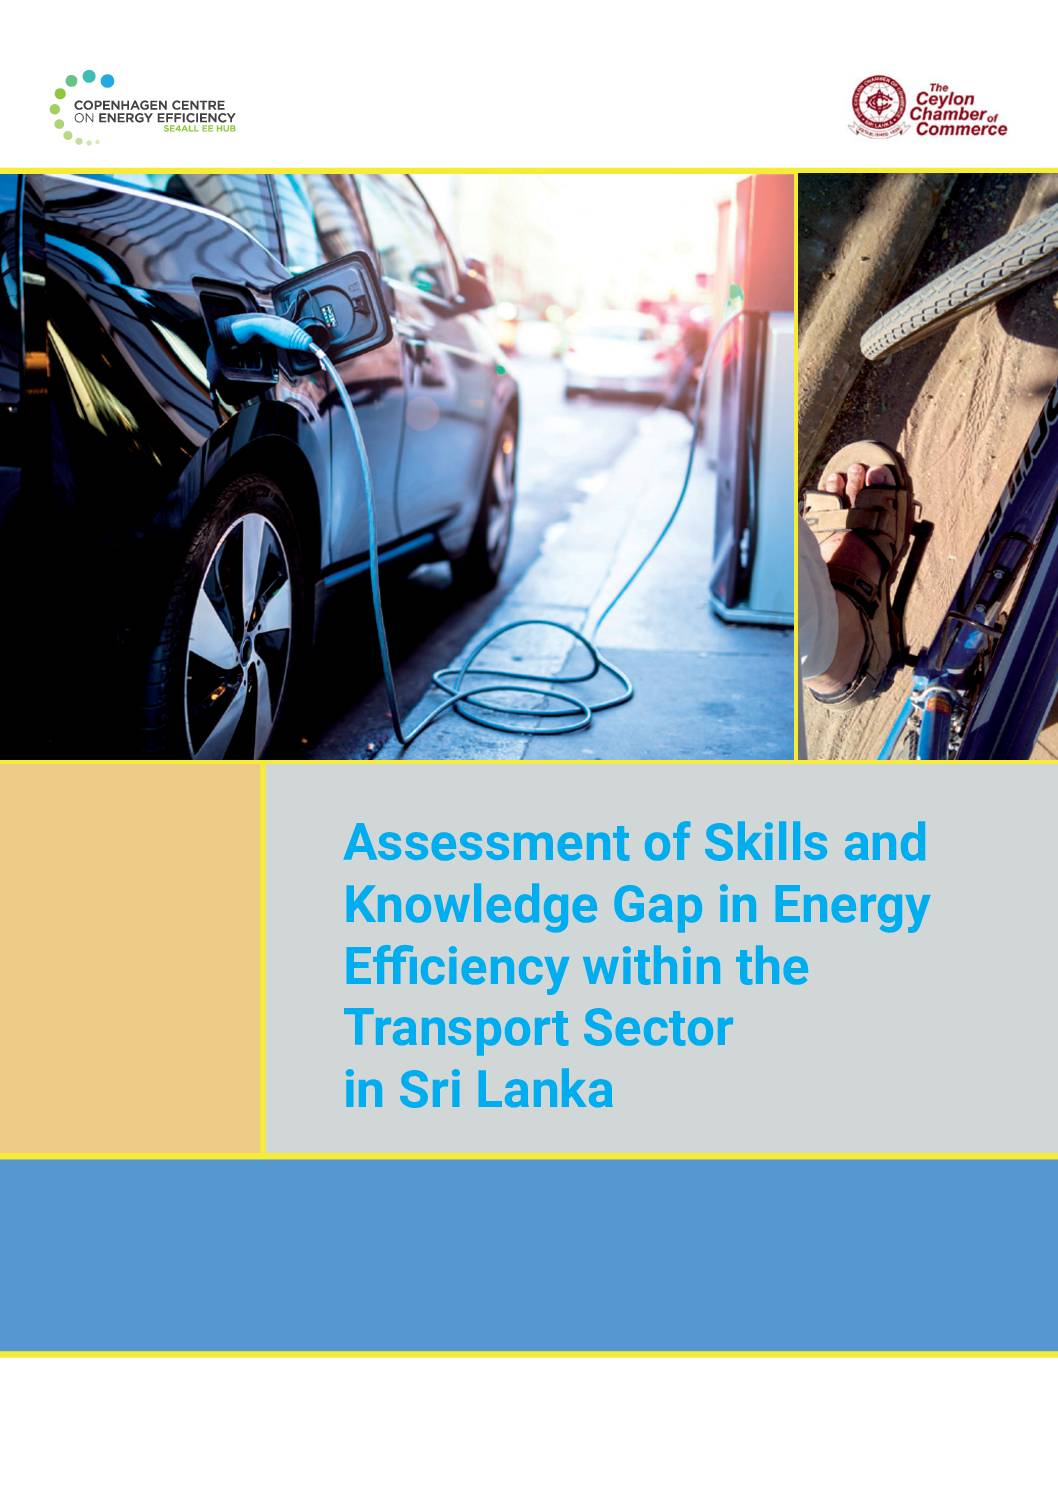 Assessment of Skills and Knowledge Gap in Energy Efficiency within the Transport Sector in Sri Lanka